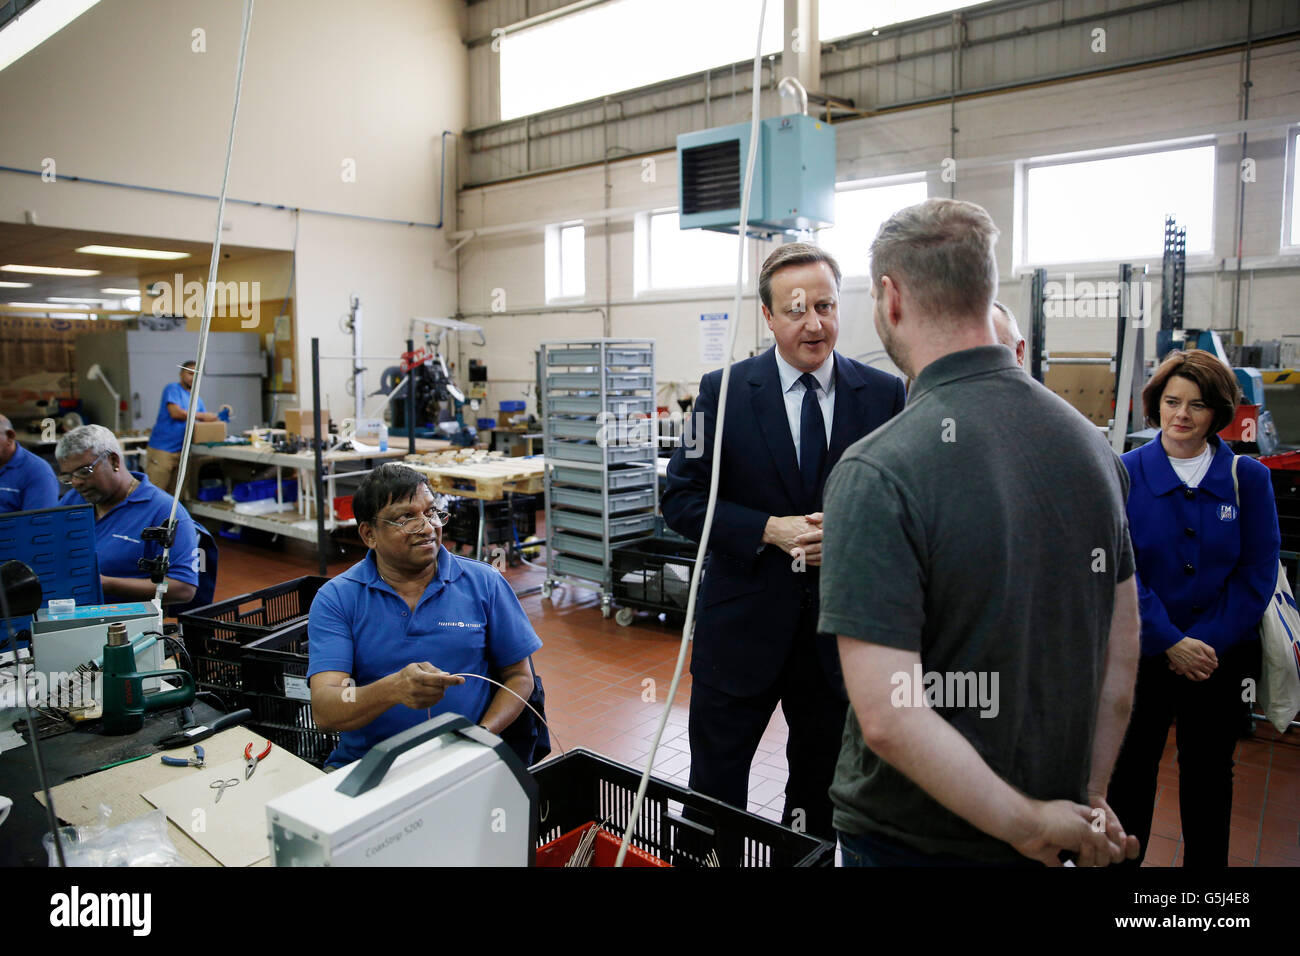 Prime Minister David Cameron speaks to employees as Jane Ellison looks on during an EU referendum related visit to Panorama Antennas, a small family business in Wandsworth, south London. Stock Photo